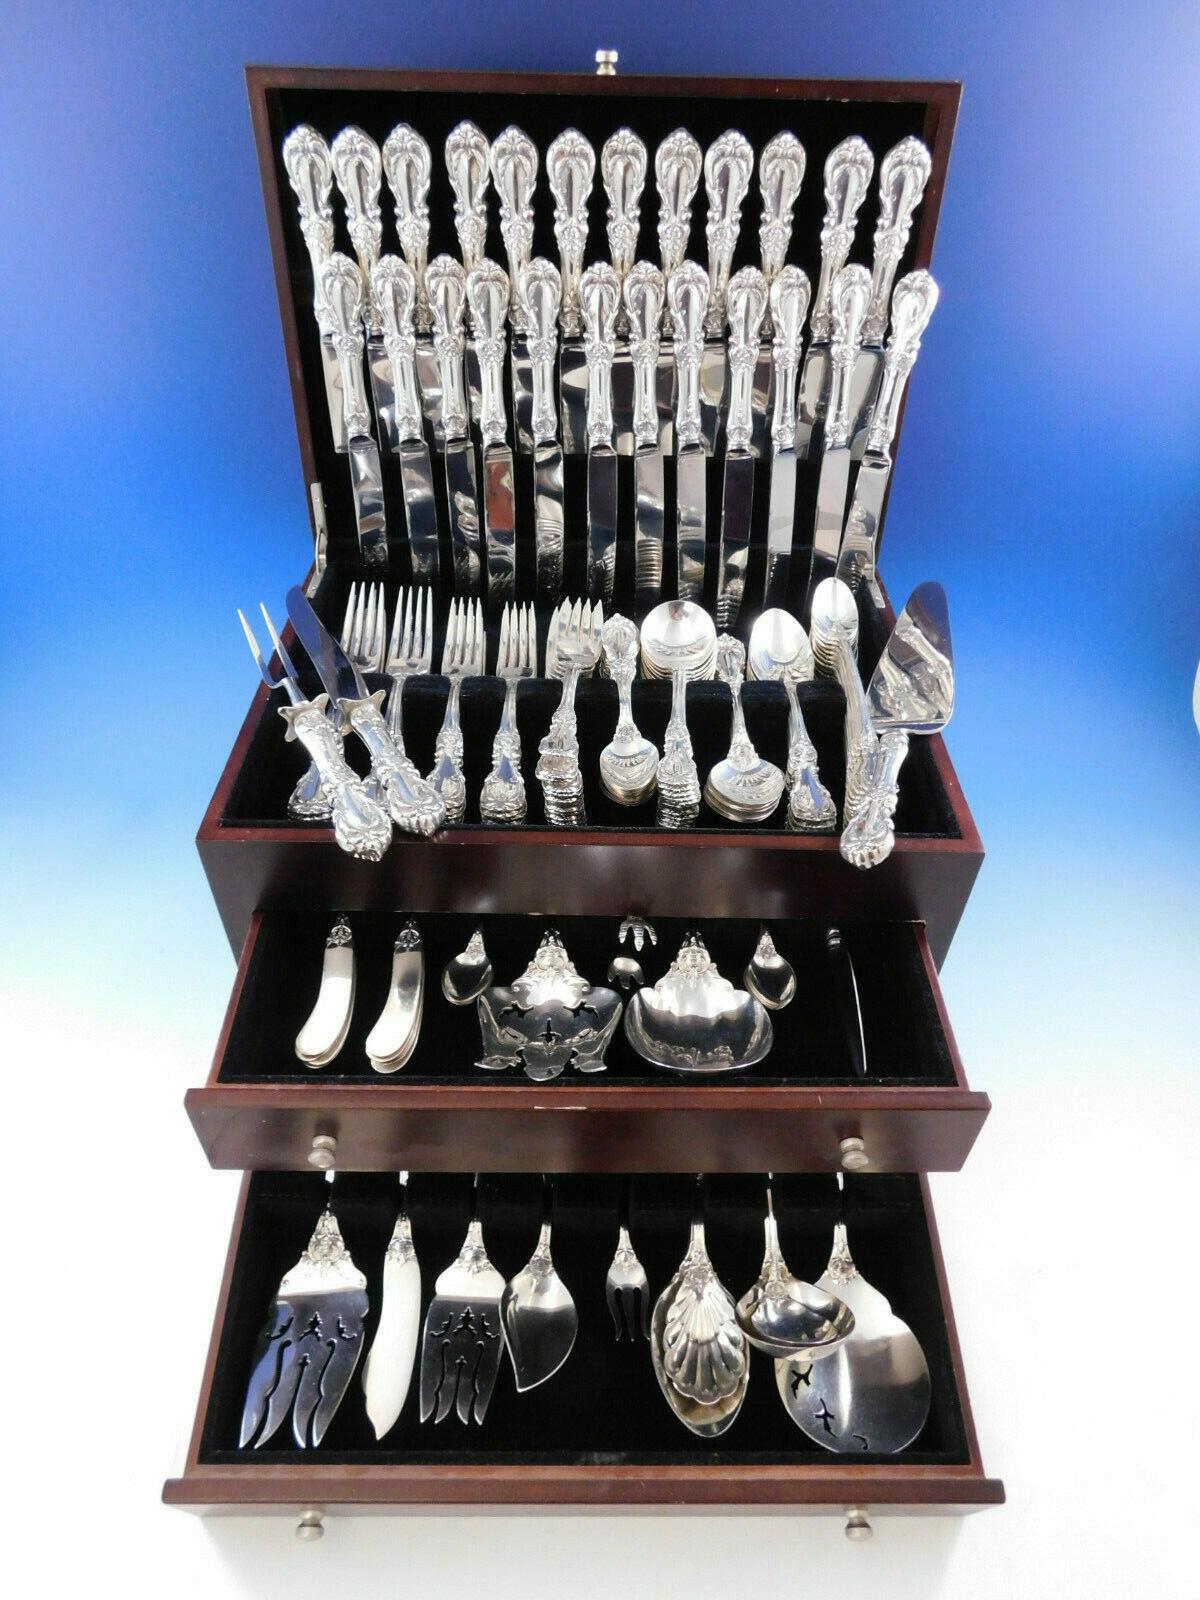 Monumental burgundy by Reed & Barton sterling silver flatware set, 150 pieces. This set includes:

12 dinner size knives, 9 5/8